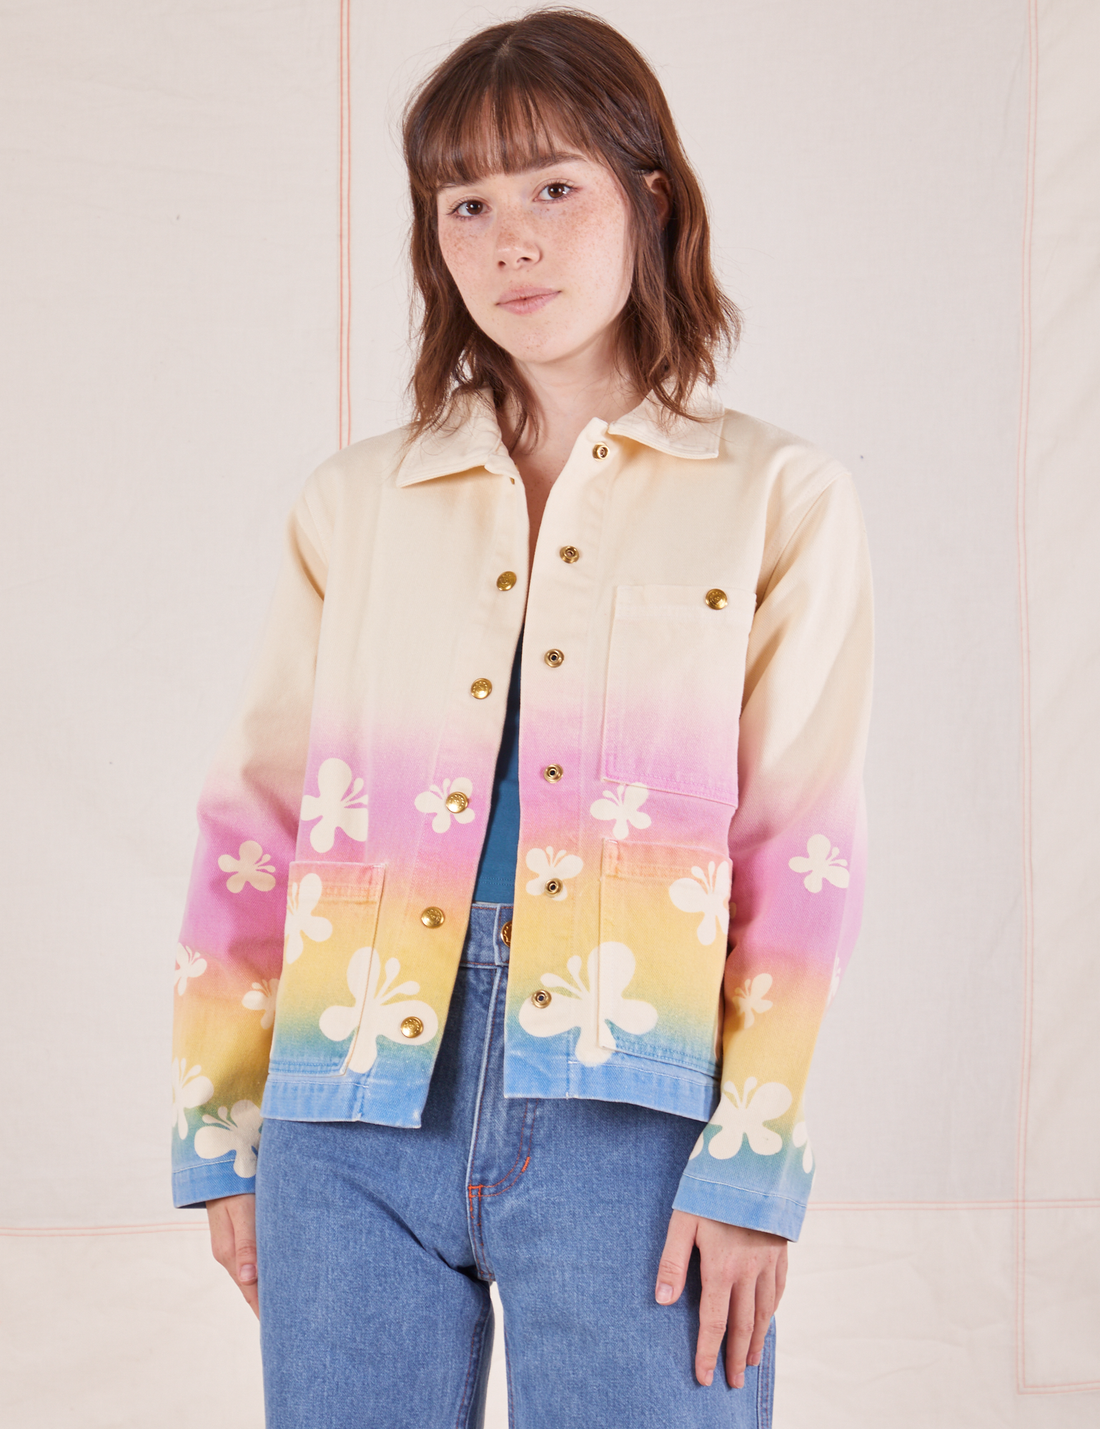 Hana is 5'3" and wearing P Work Jacket in Butterfly Airbrush